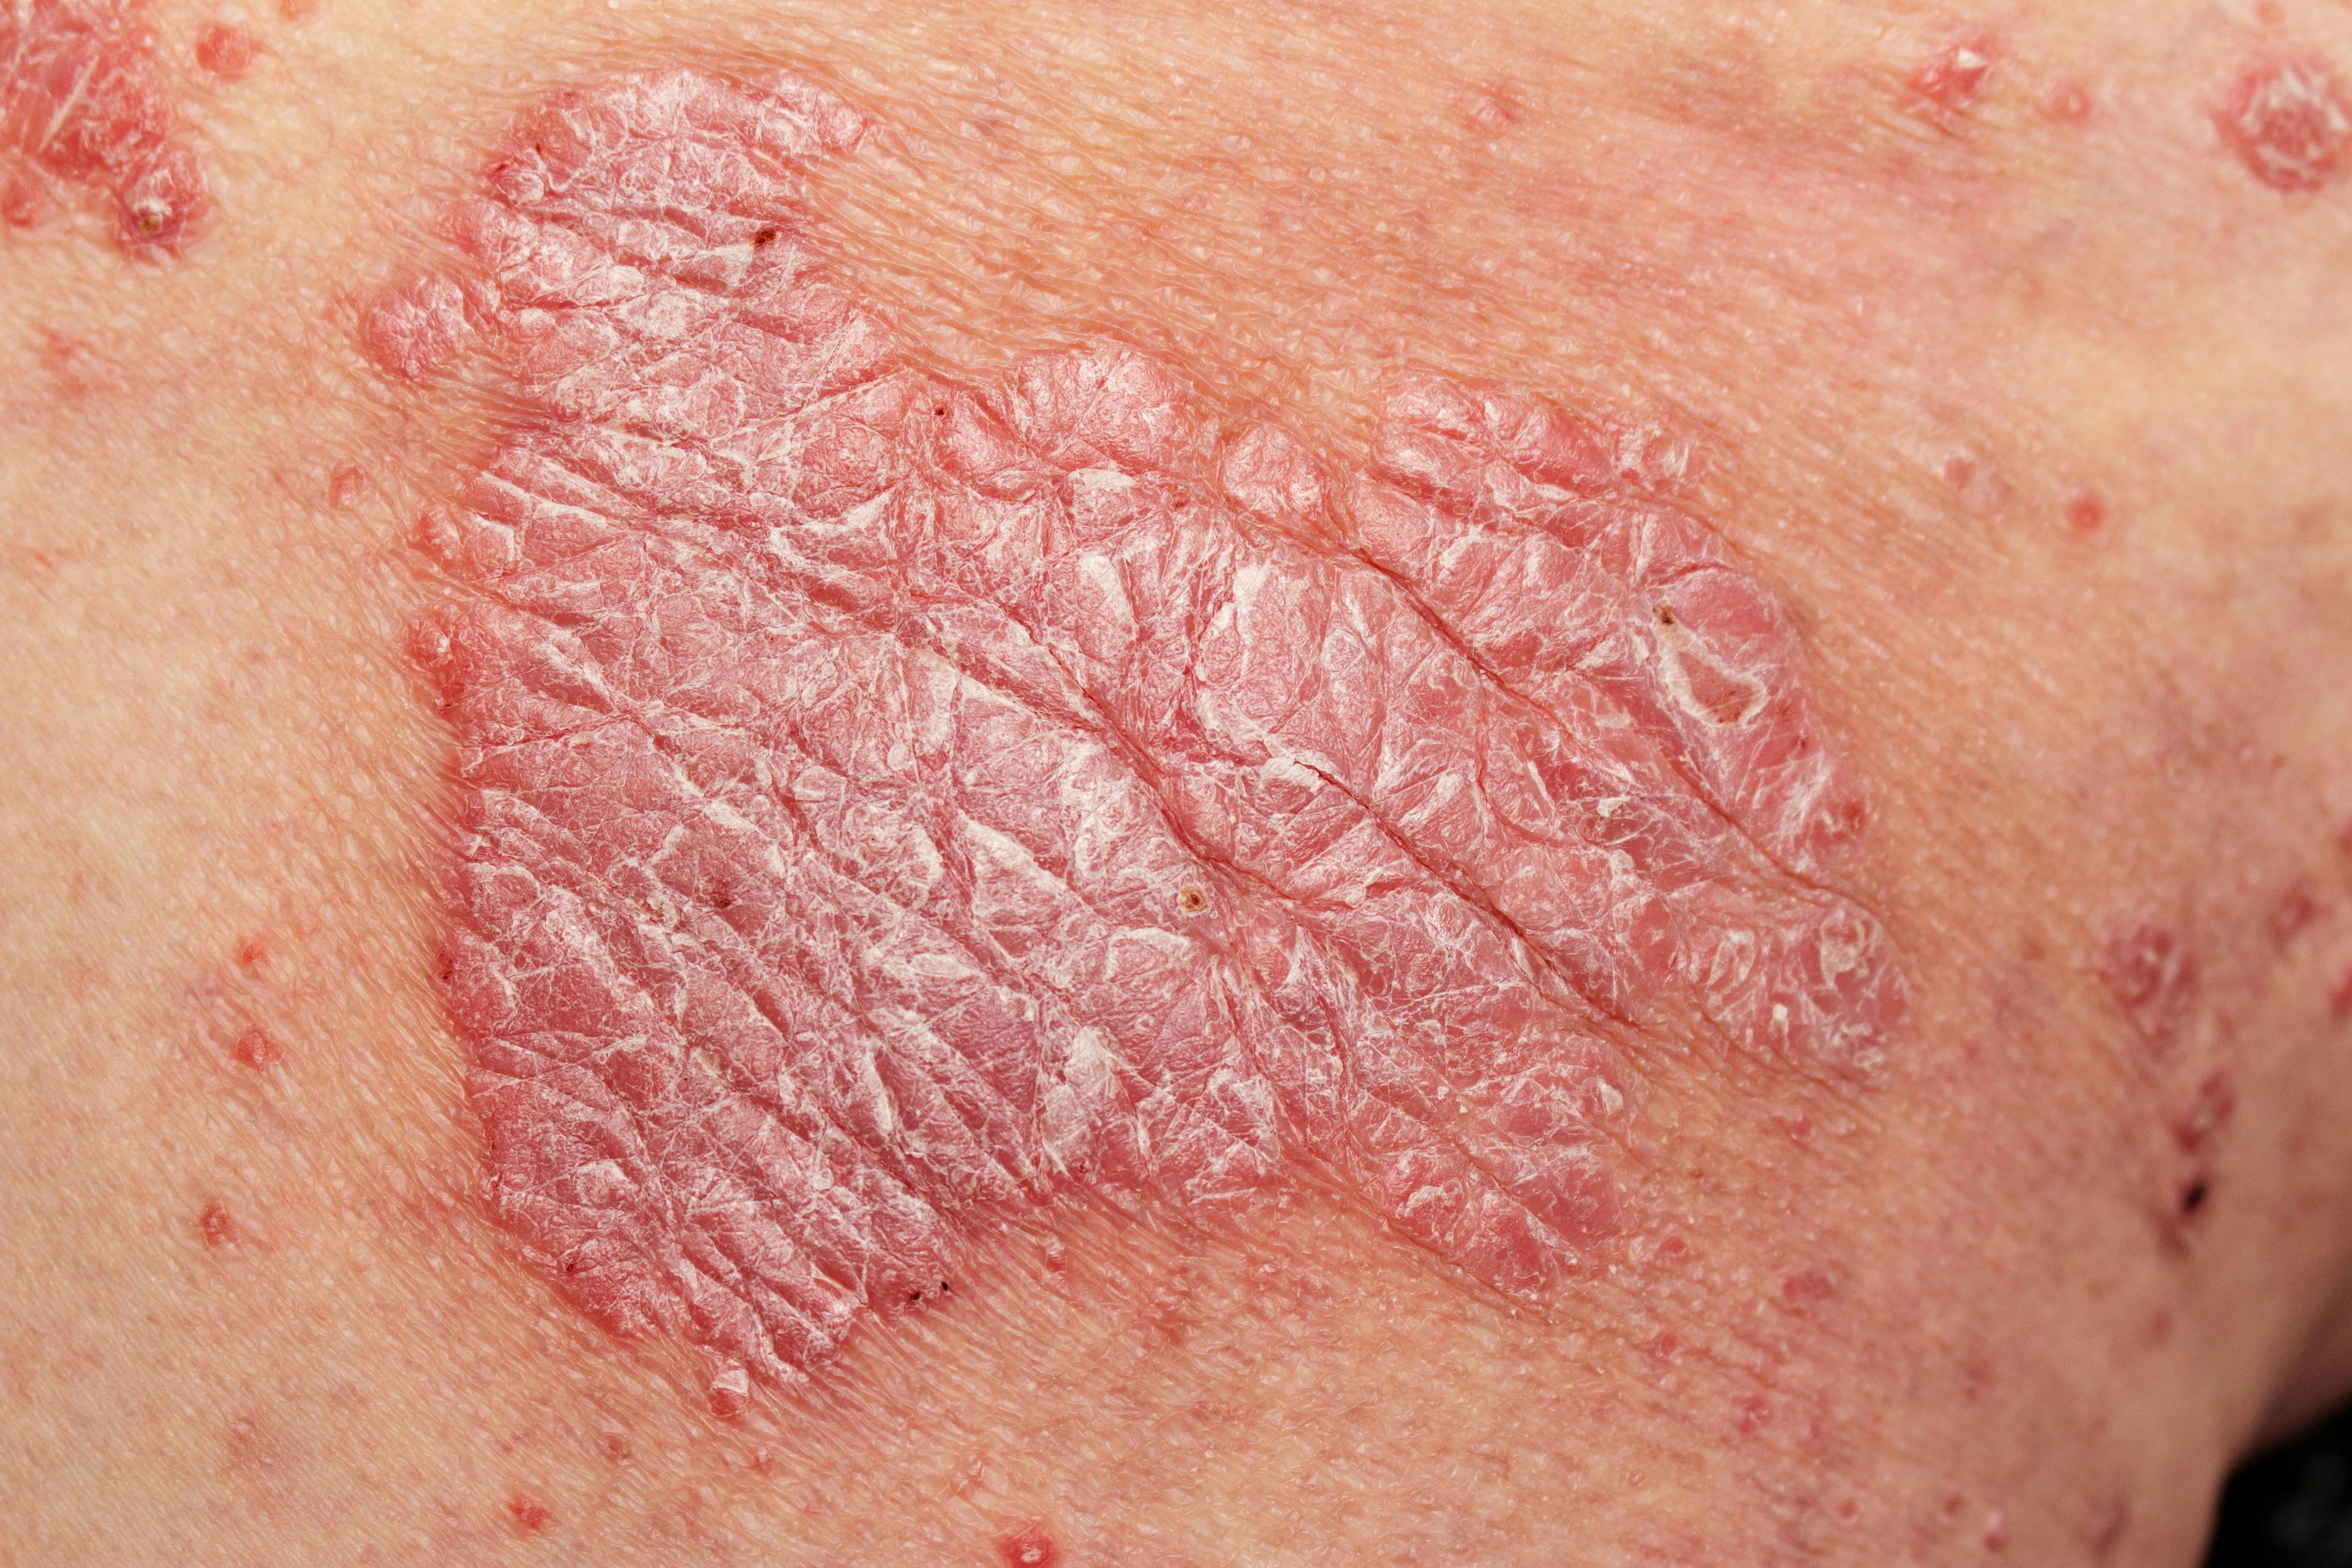 Vitamin D has no Significant Impact on Psoriasis Severity